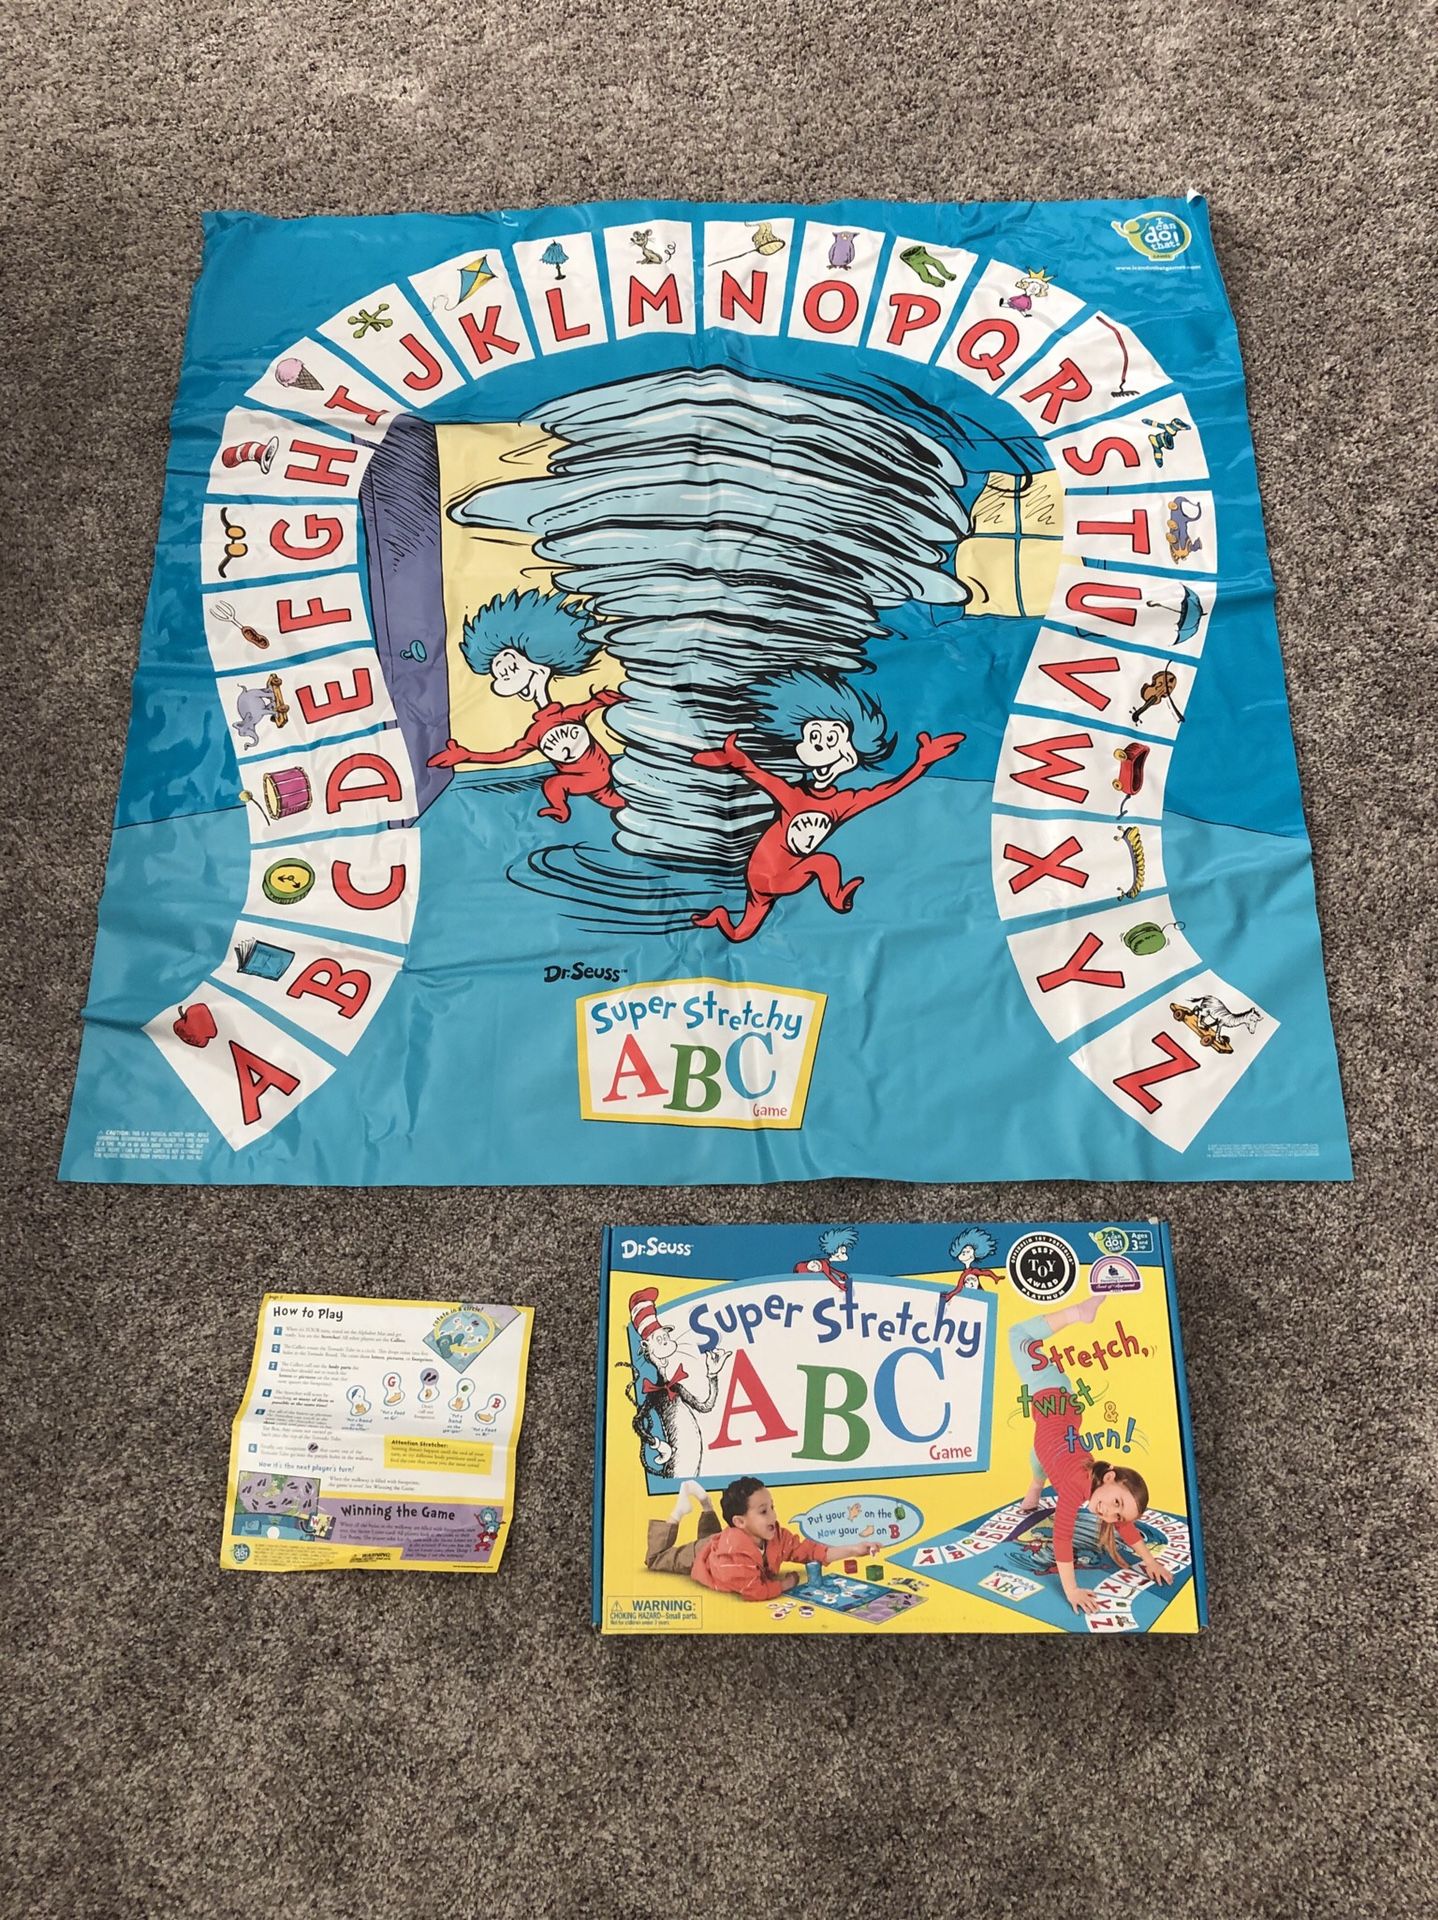 Rare HTF The Wonder Forge Super Stretchy Dr Suess ABC Kids Game